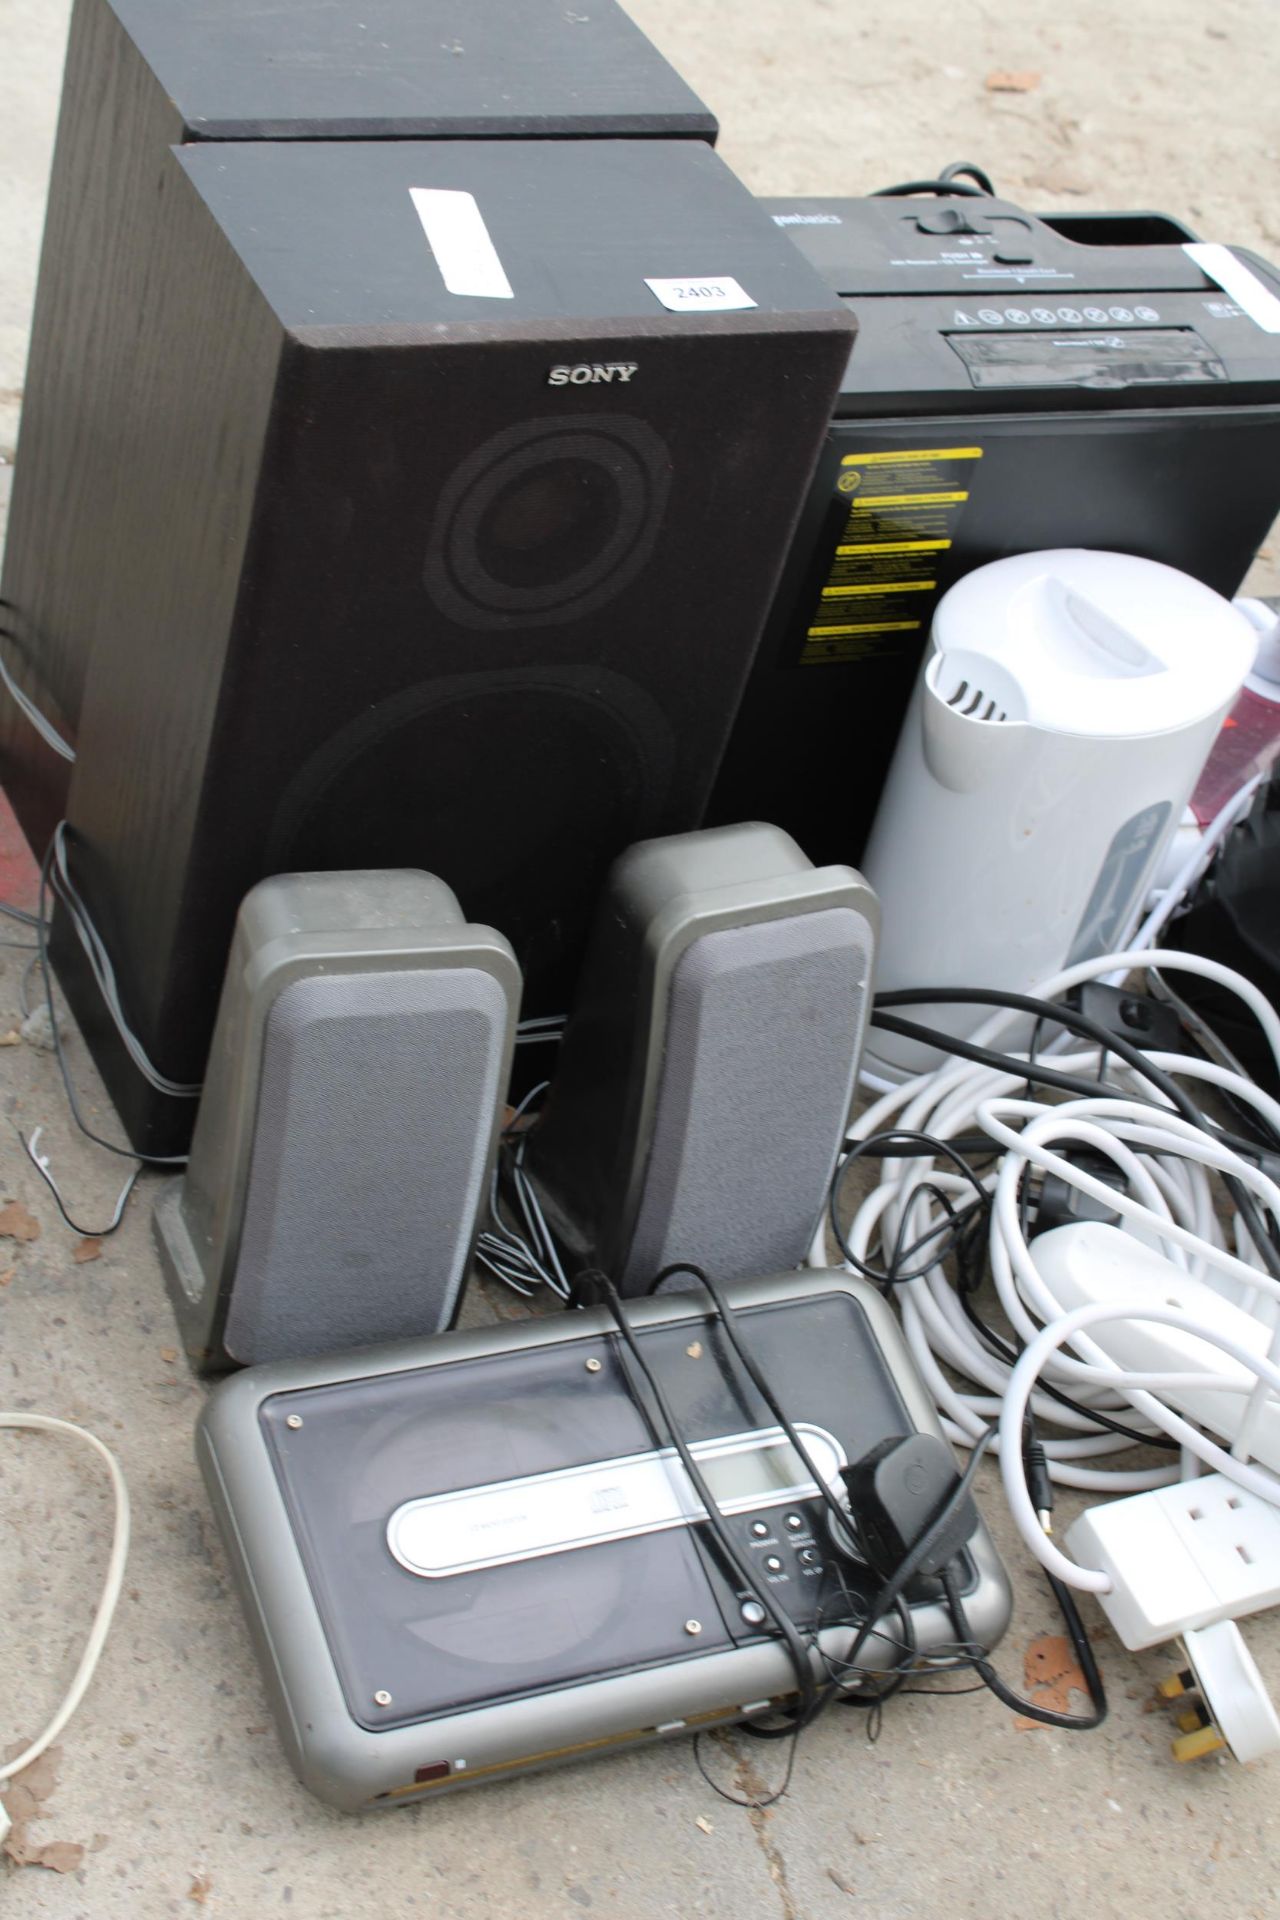 VARIOUS ITEMS TO INCLUDE A FOUR SLICE TOASTER, KETTLE, EXTENSION CABLES, SONY SPEAKERS ETC - Image 3 of 3